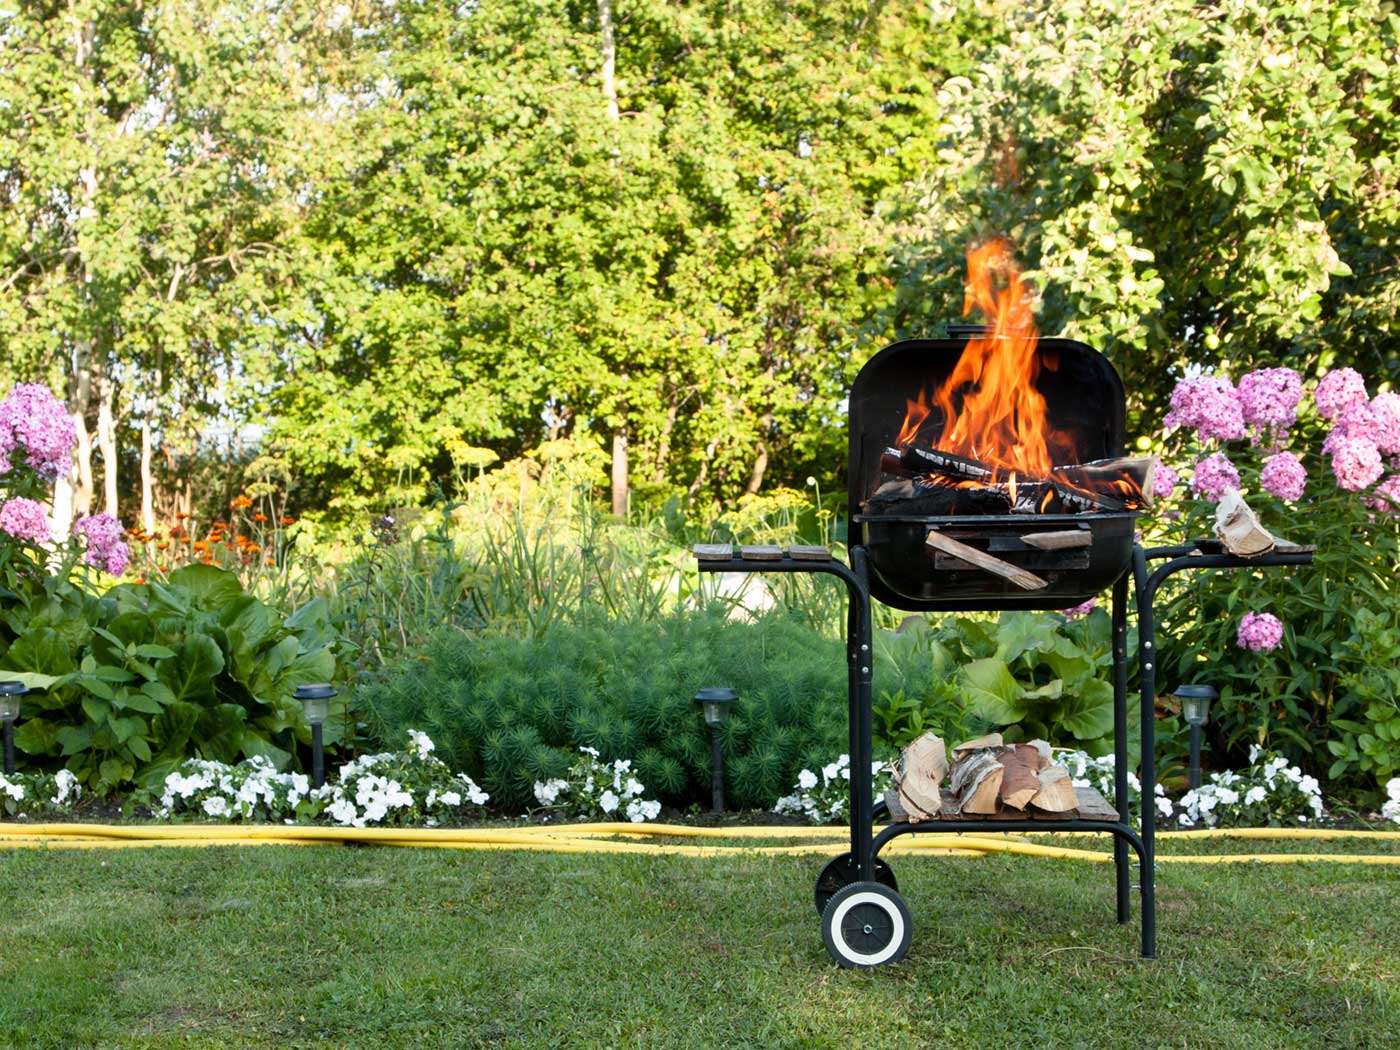 A backyard BBQ grill that is on fire with flames shooting out of the lid.